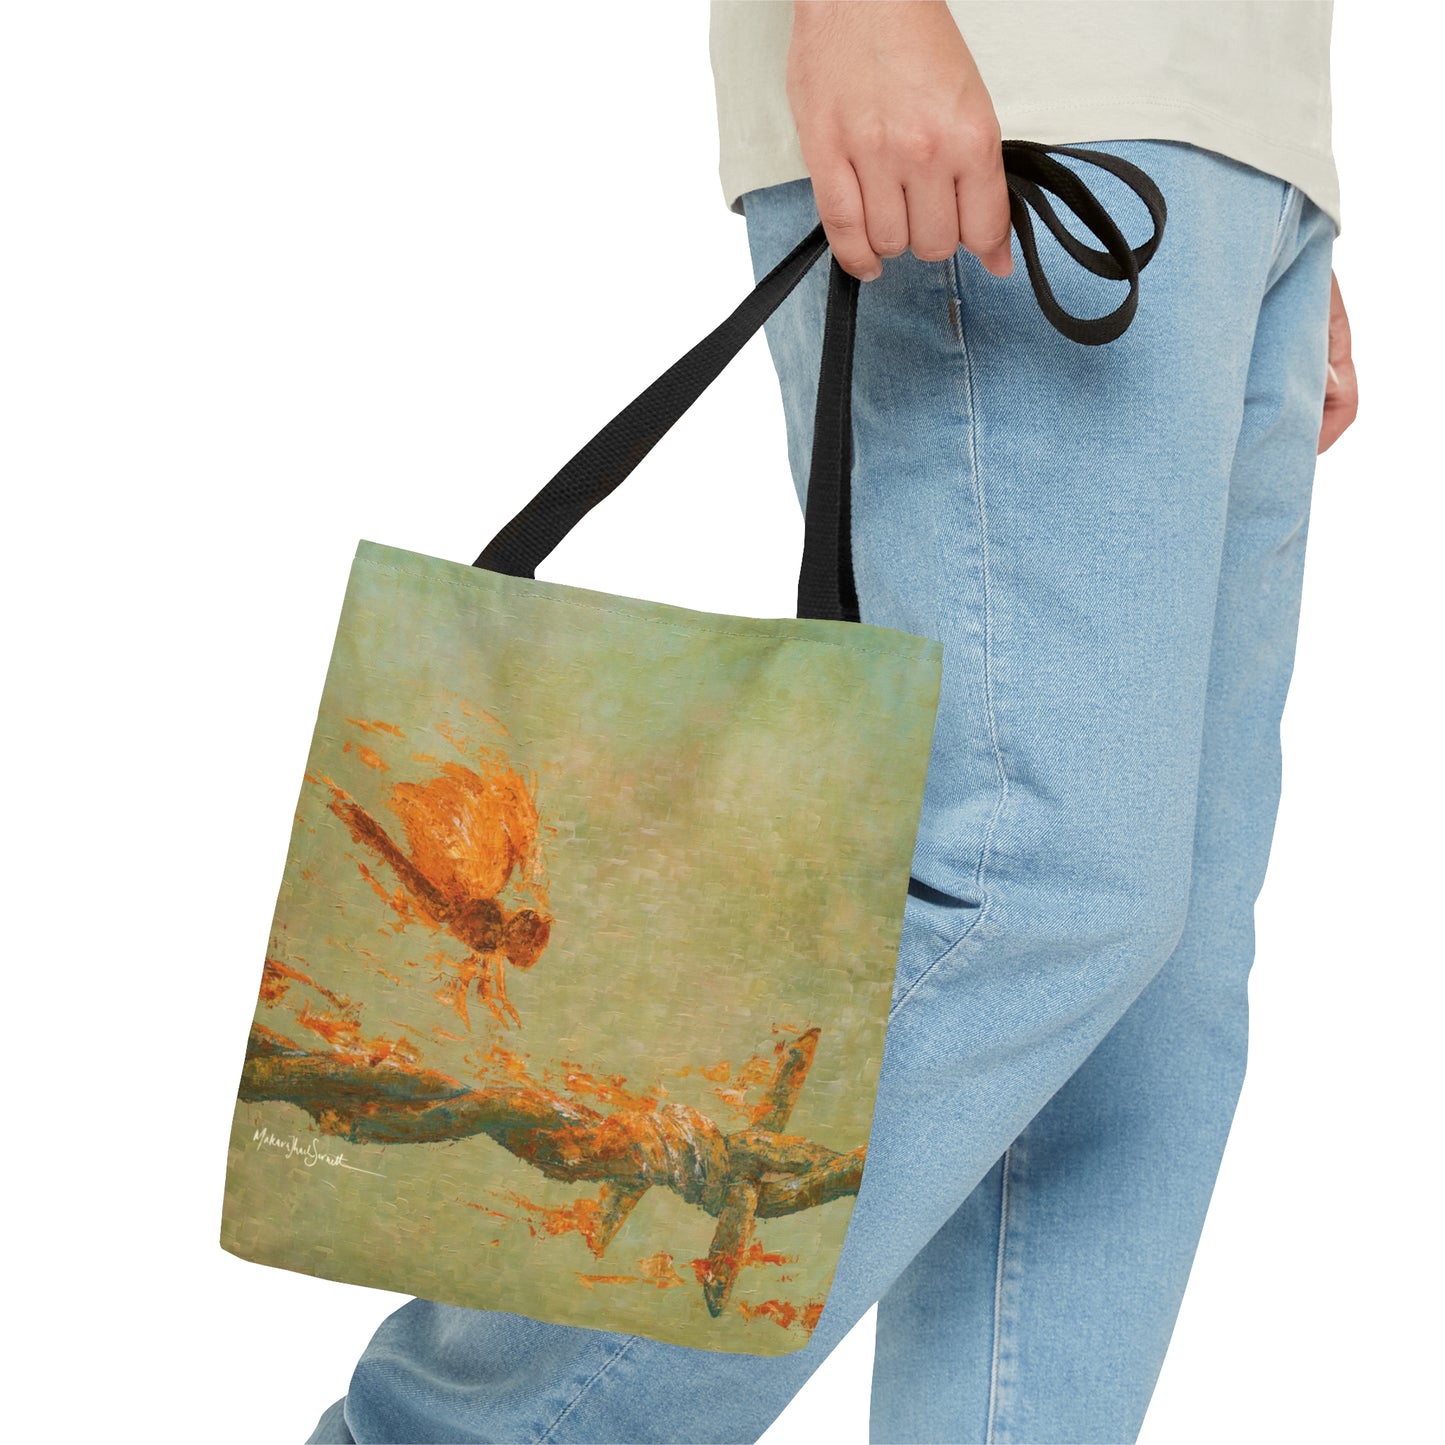 Soar Within Tote Bag